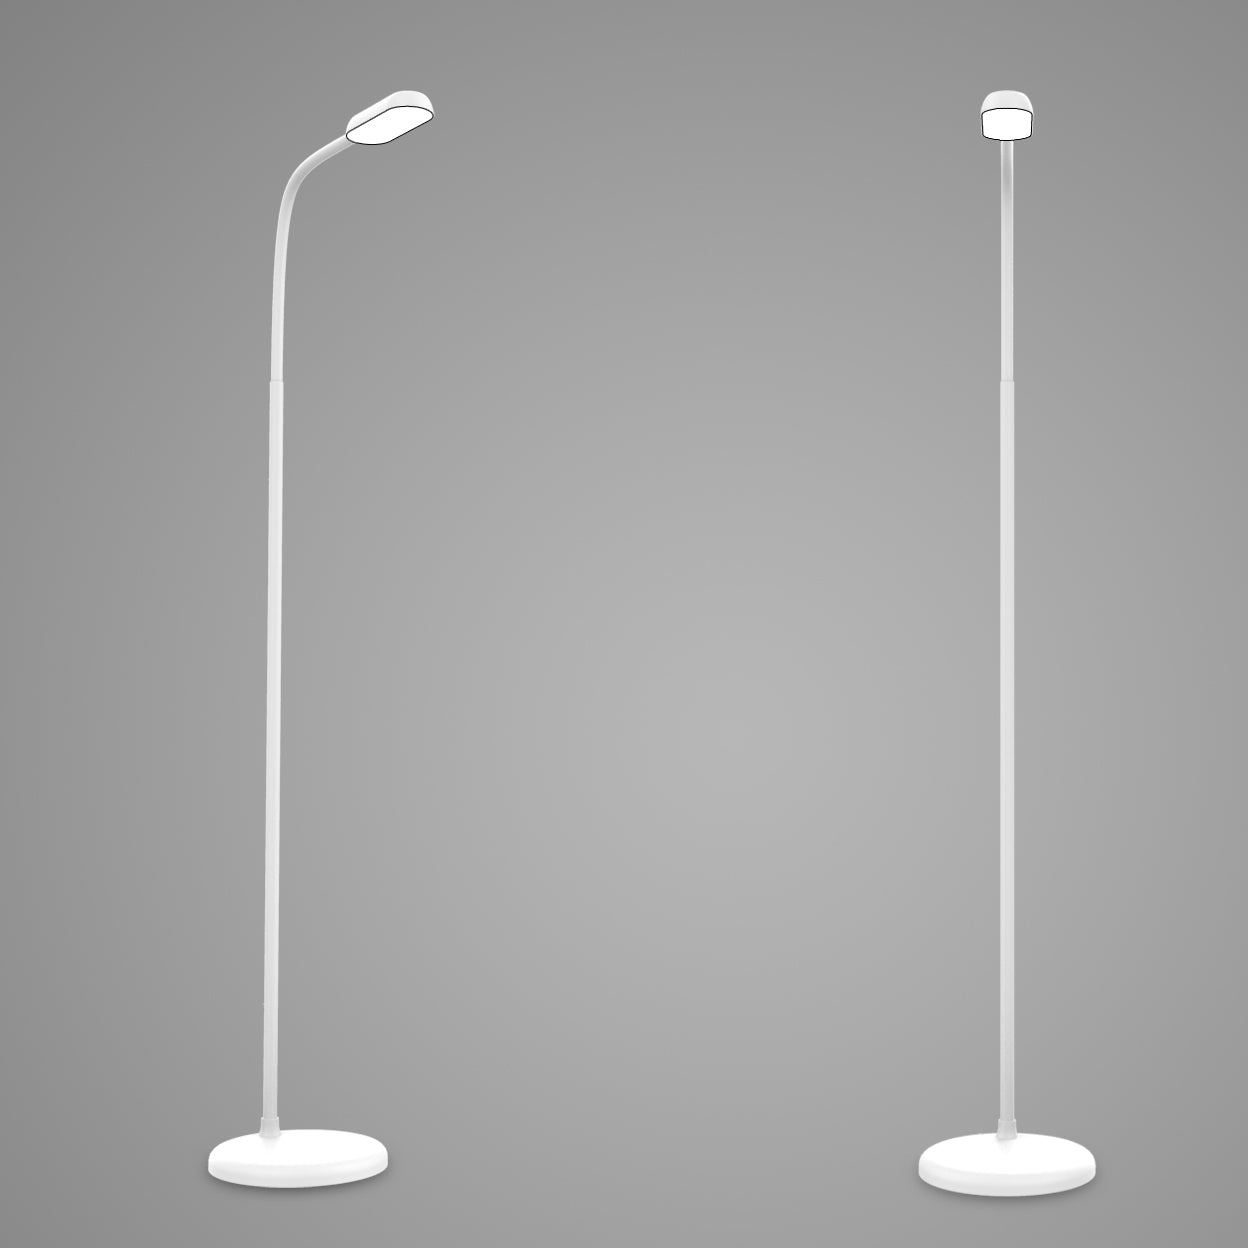 LUMOS LED Rechargeable Battery Operated Reading Floor Lamp